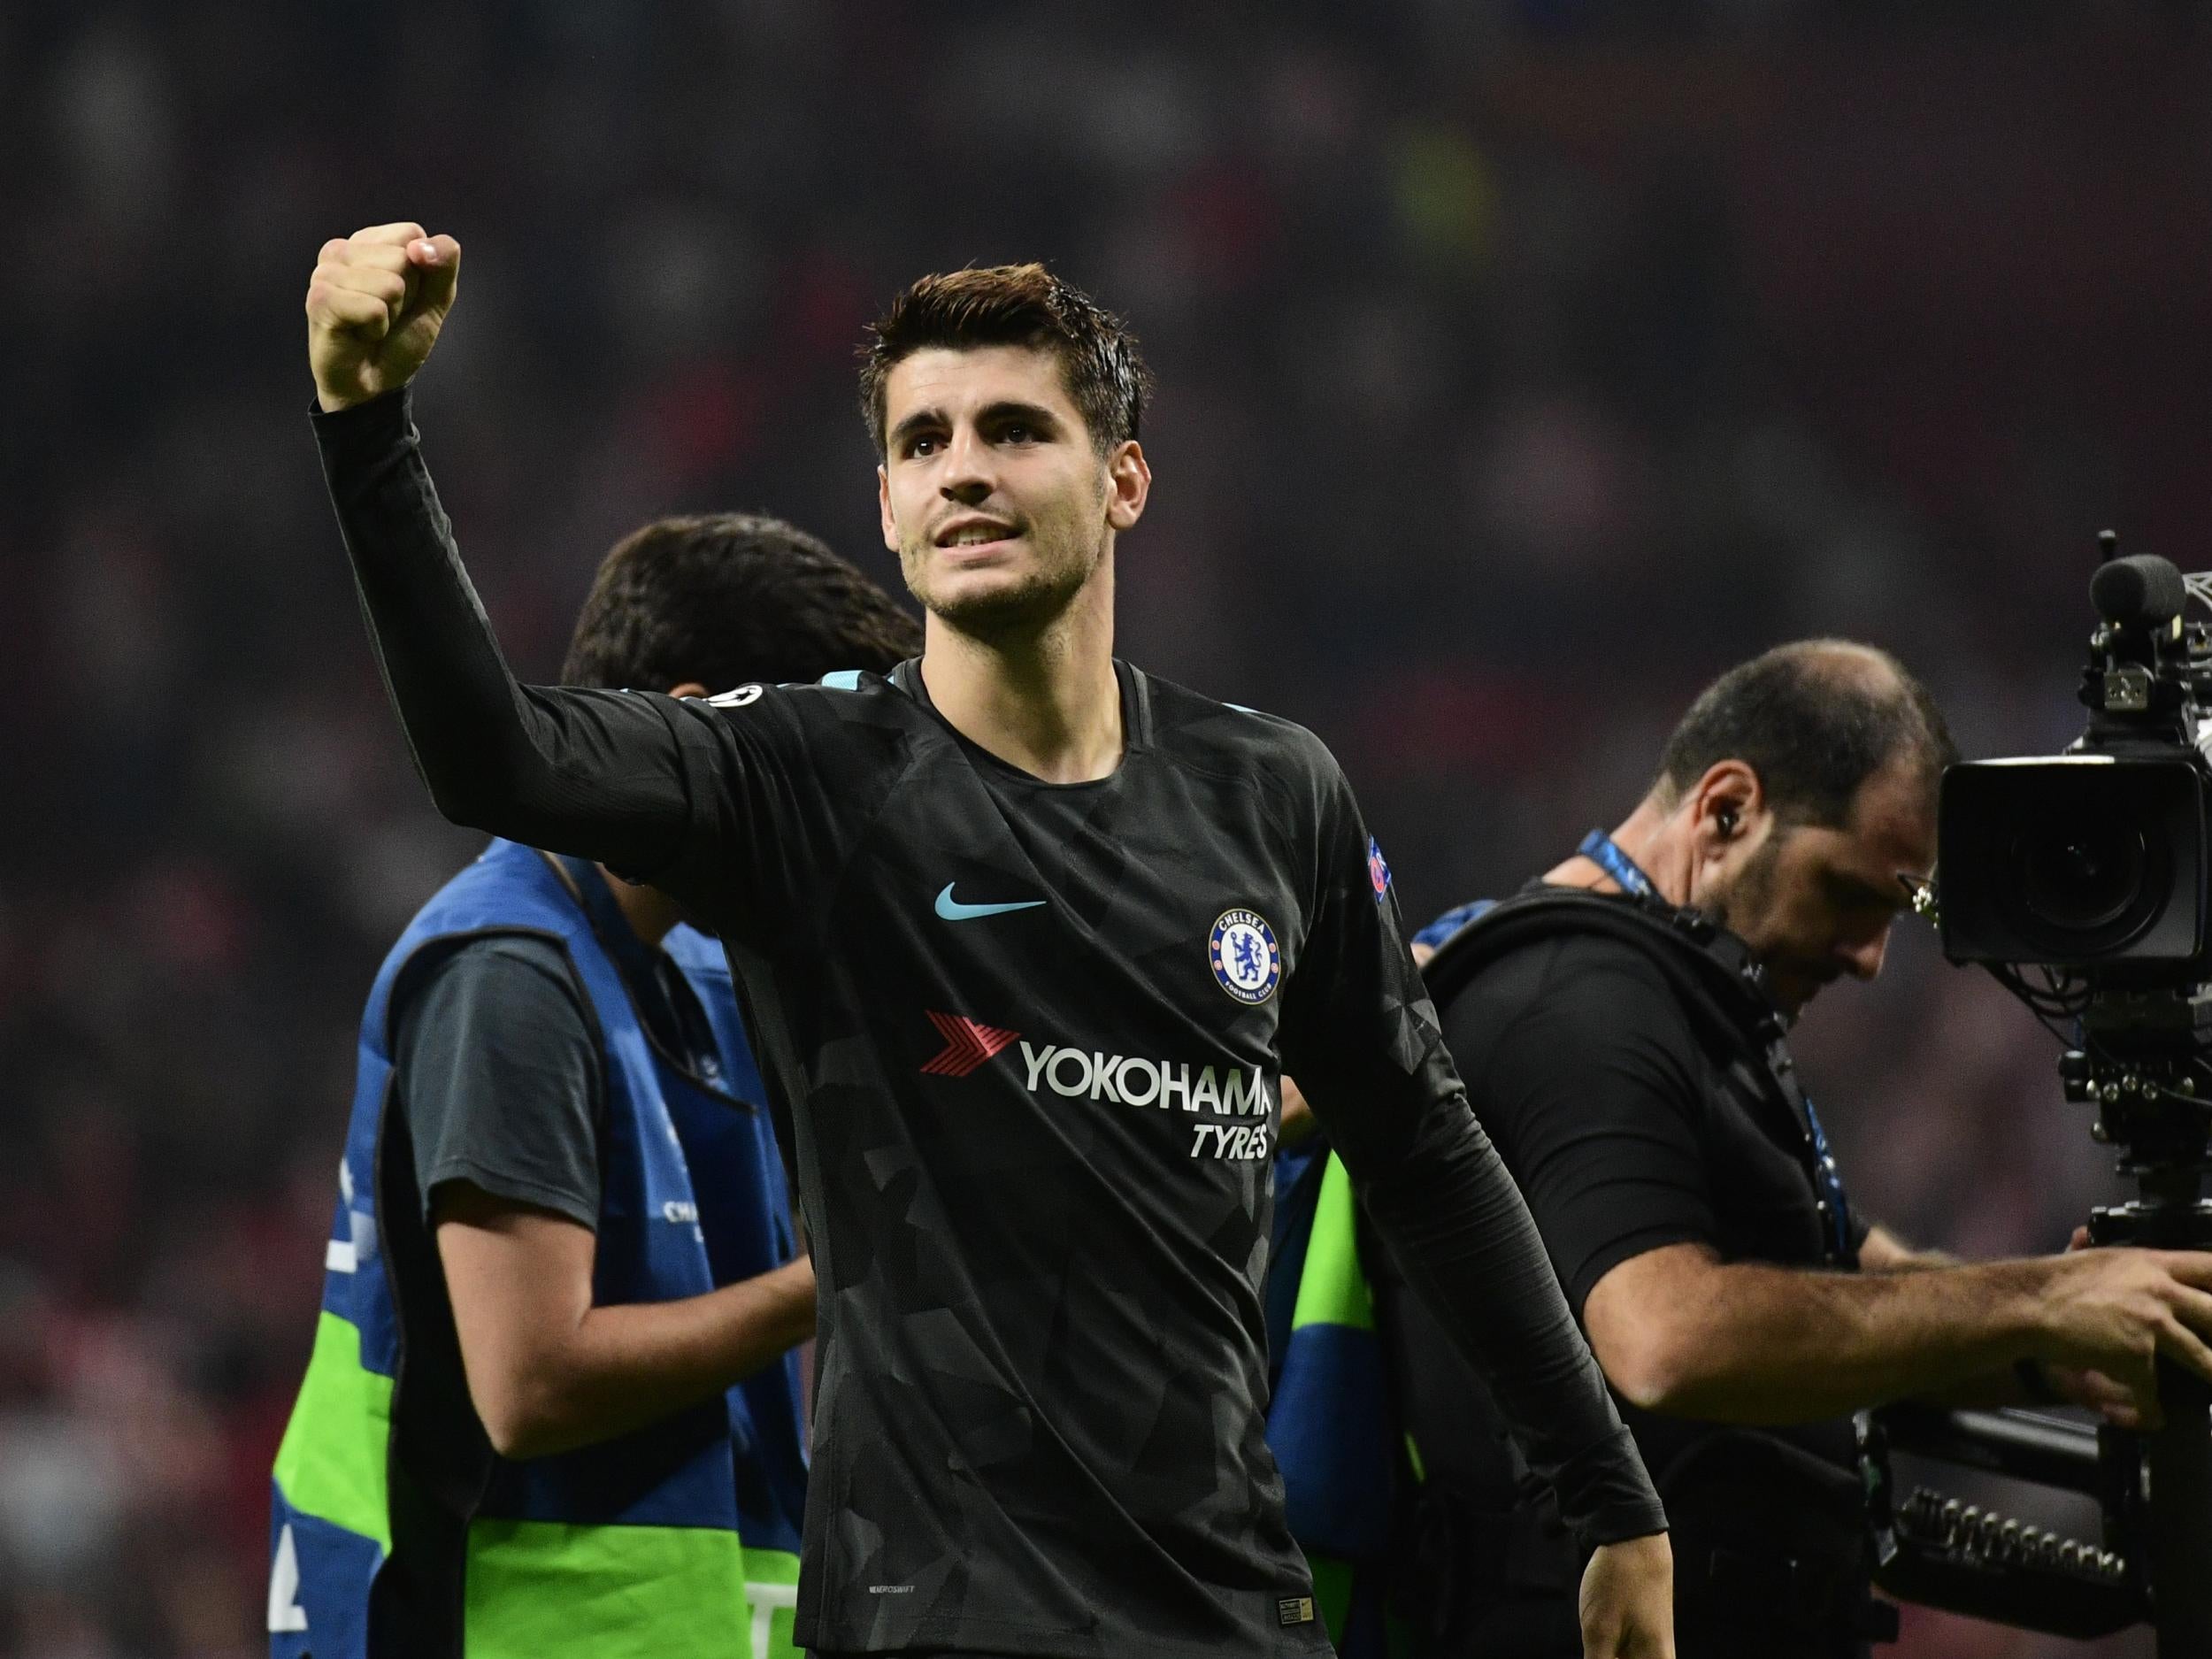 Alvaro Morata was at the heart of everything for Chelsea on Wednesday night